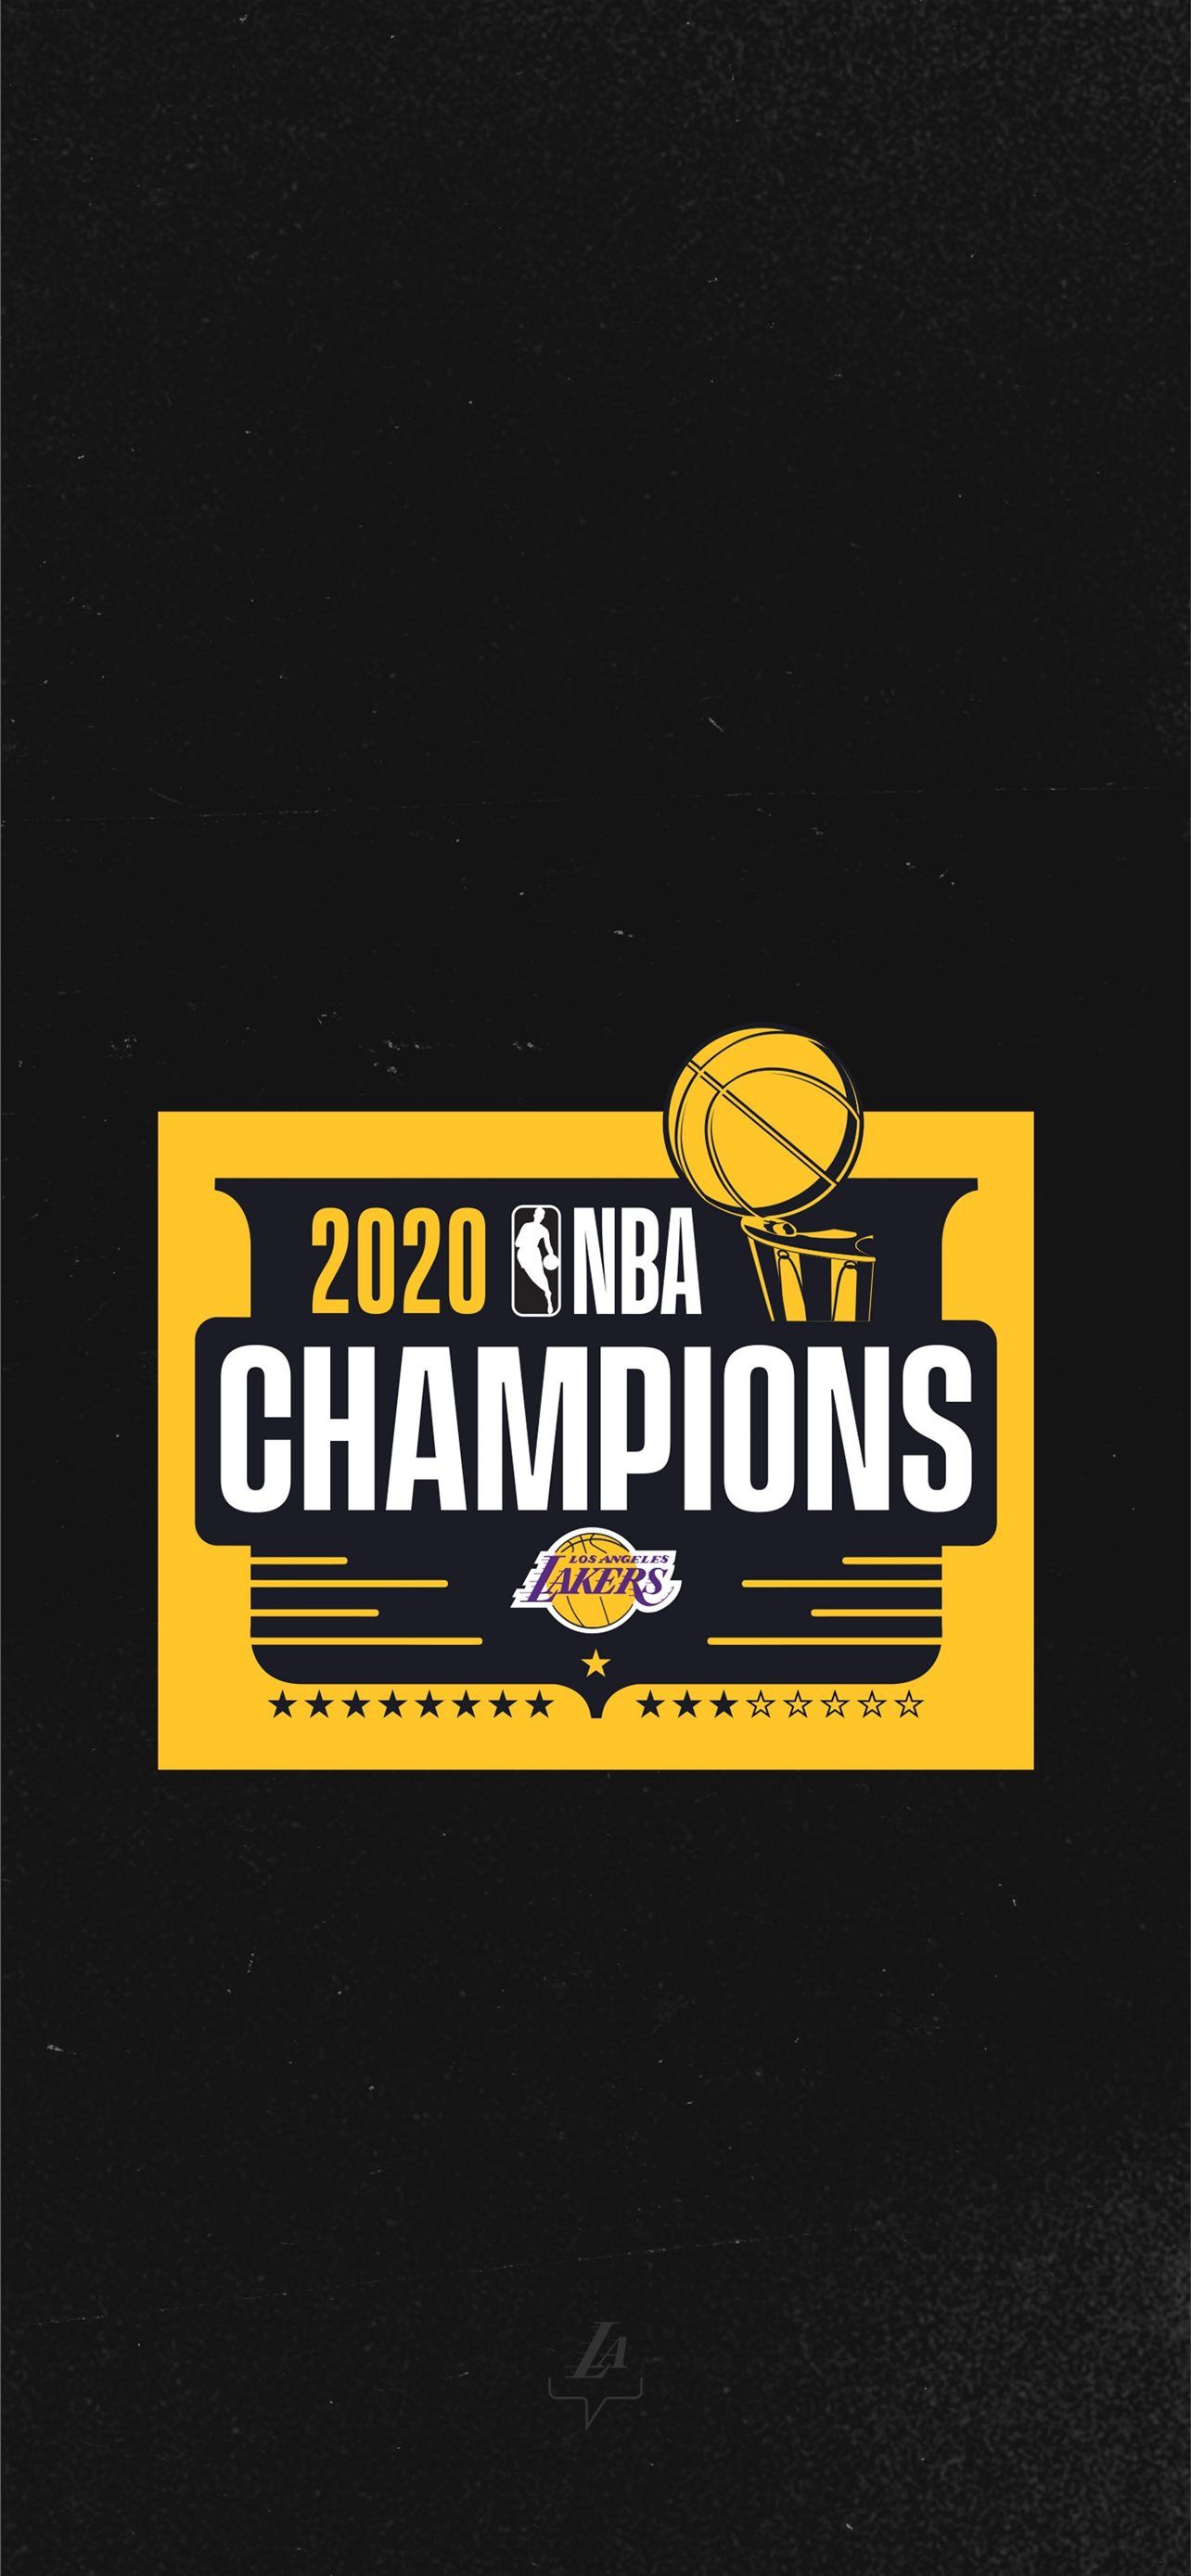 Lakers 2020 NBA champions wallpaper for iPhone and Android devices. - Los Angeles Lakers